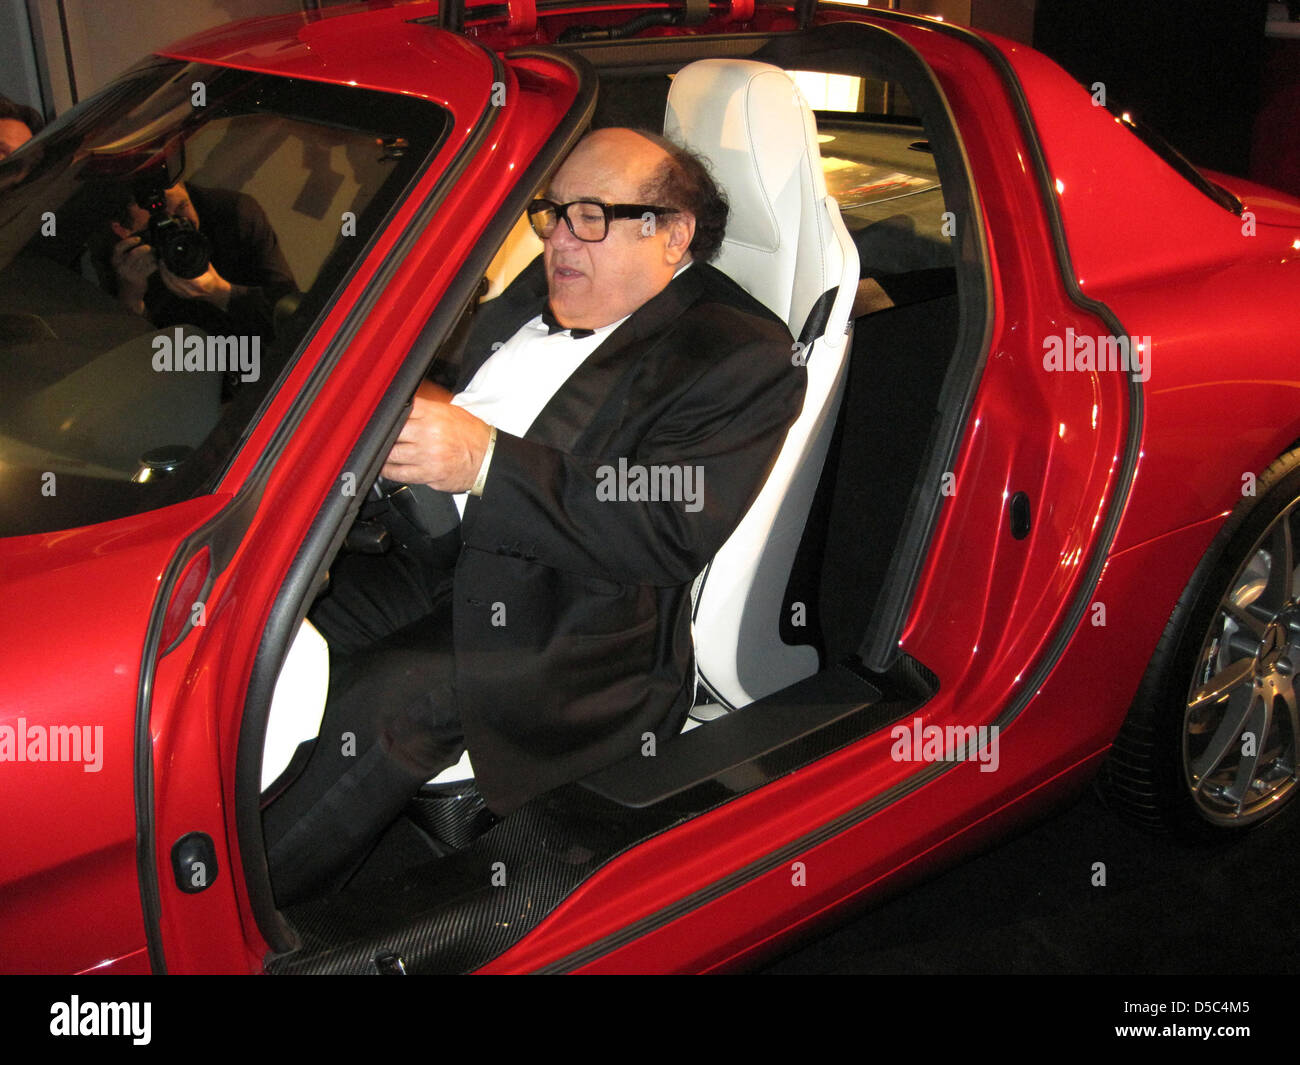 US American actor Danny DeVito sits in a Mercedes-Benz during the party after the awarding of the 'Golden Camera Awards' in Berlin, Germany, 31 January 2010. The 'Golden Camera Awards' are awarded by a German TV guide and honour excellence in movie, television, sports and media. Photo: XAMAX Stock Photo